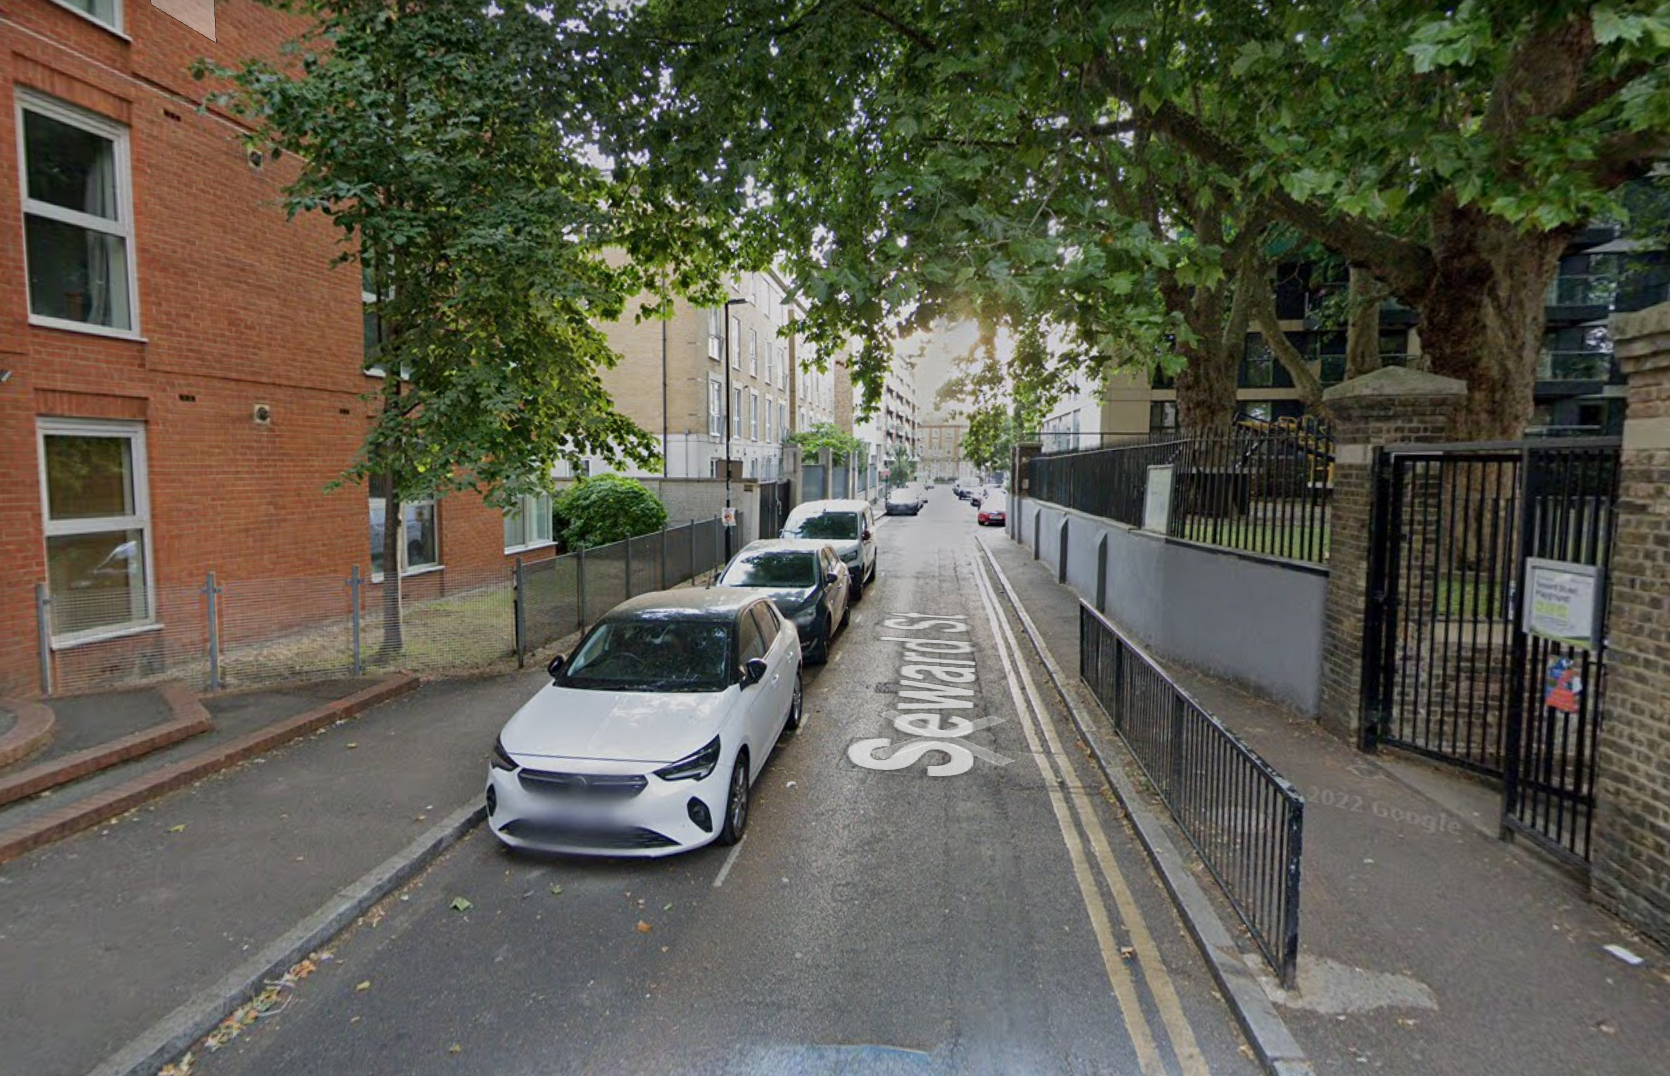 The force was alerted to the stabbing on Seward Street, Clerkenwell